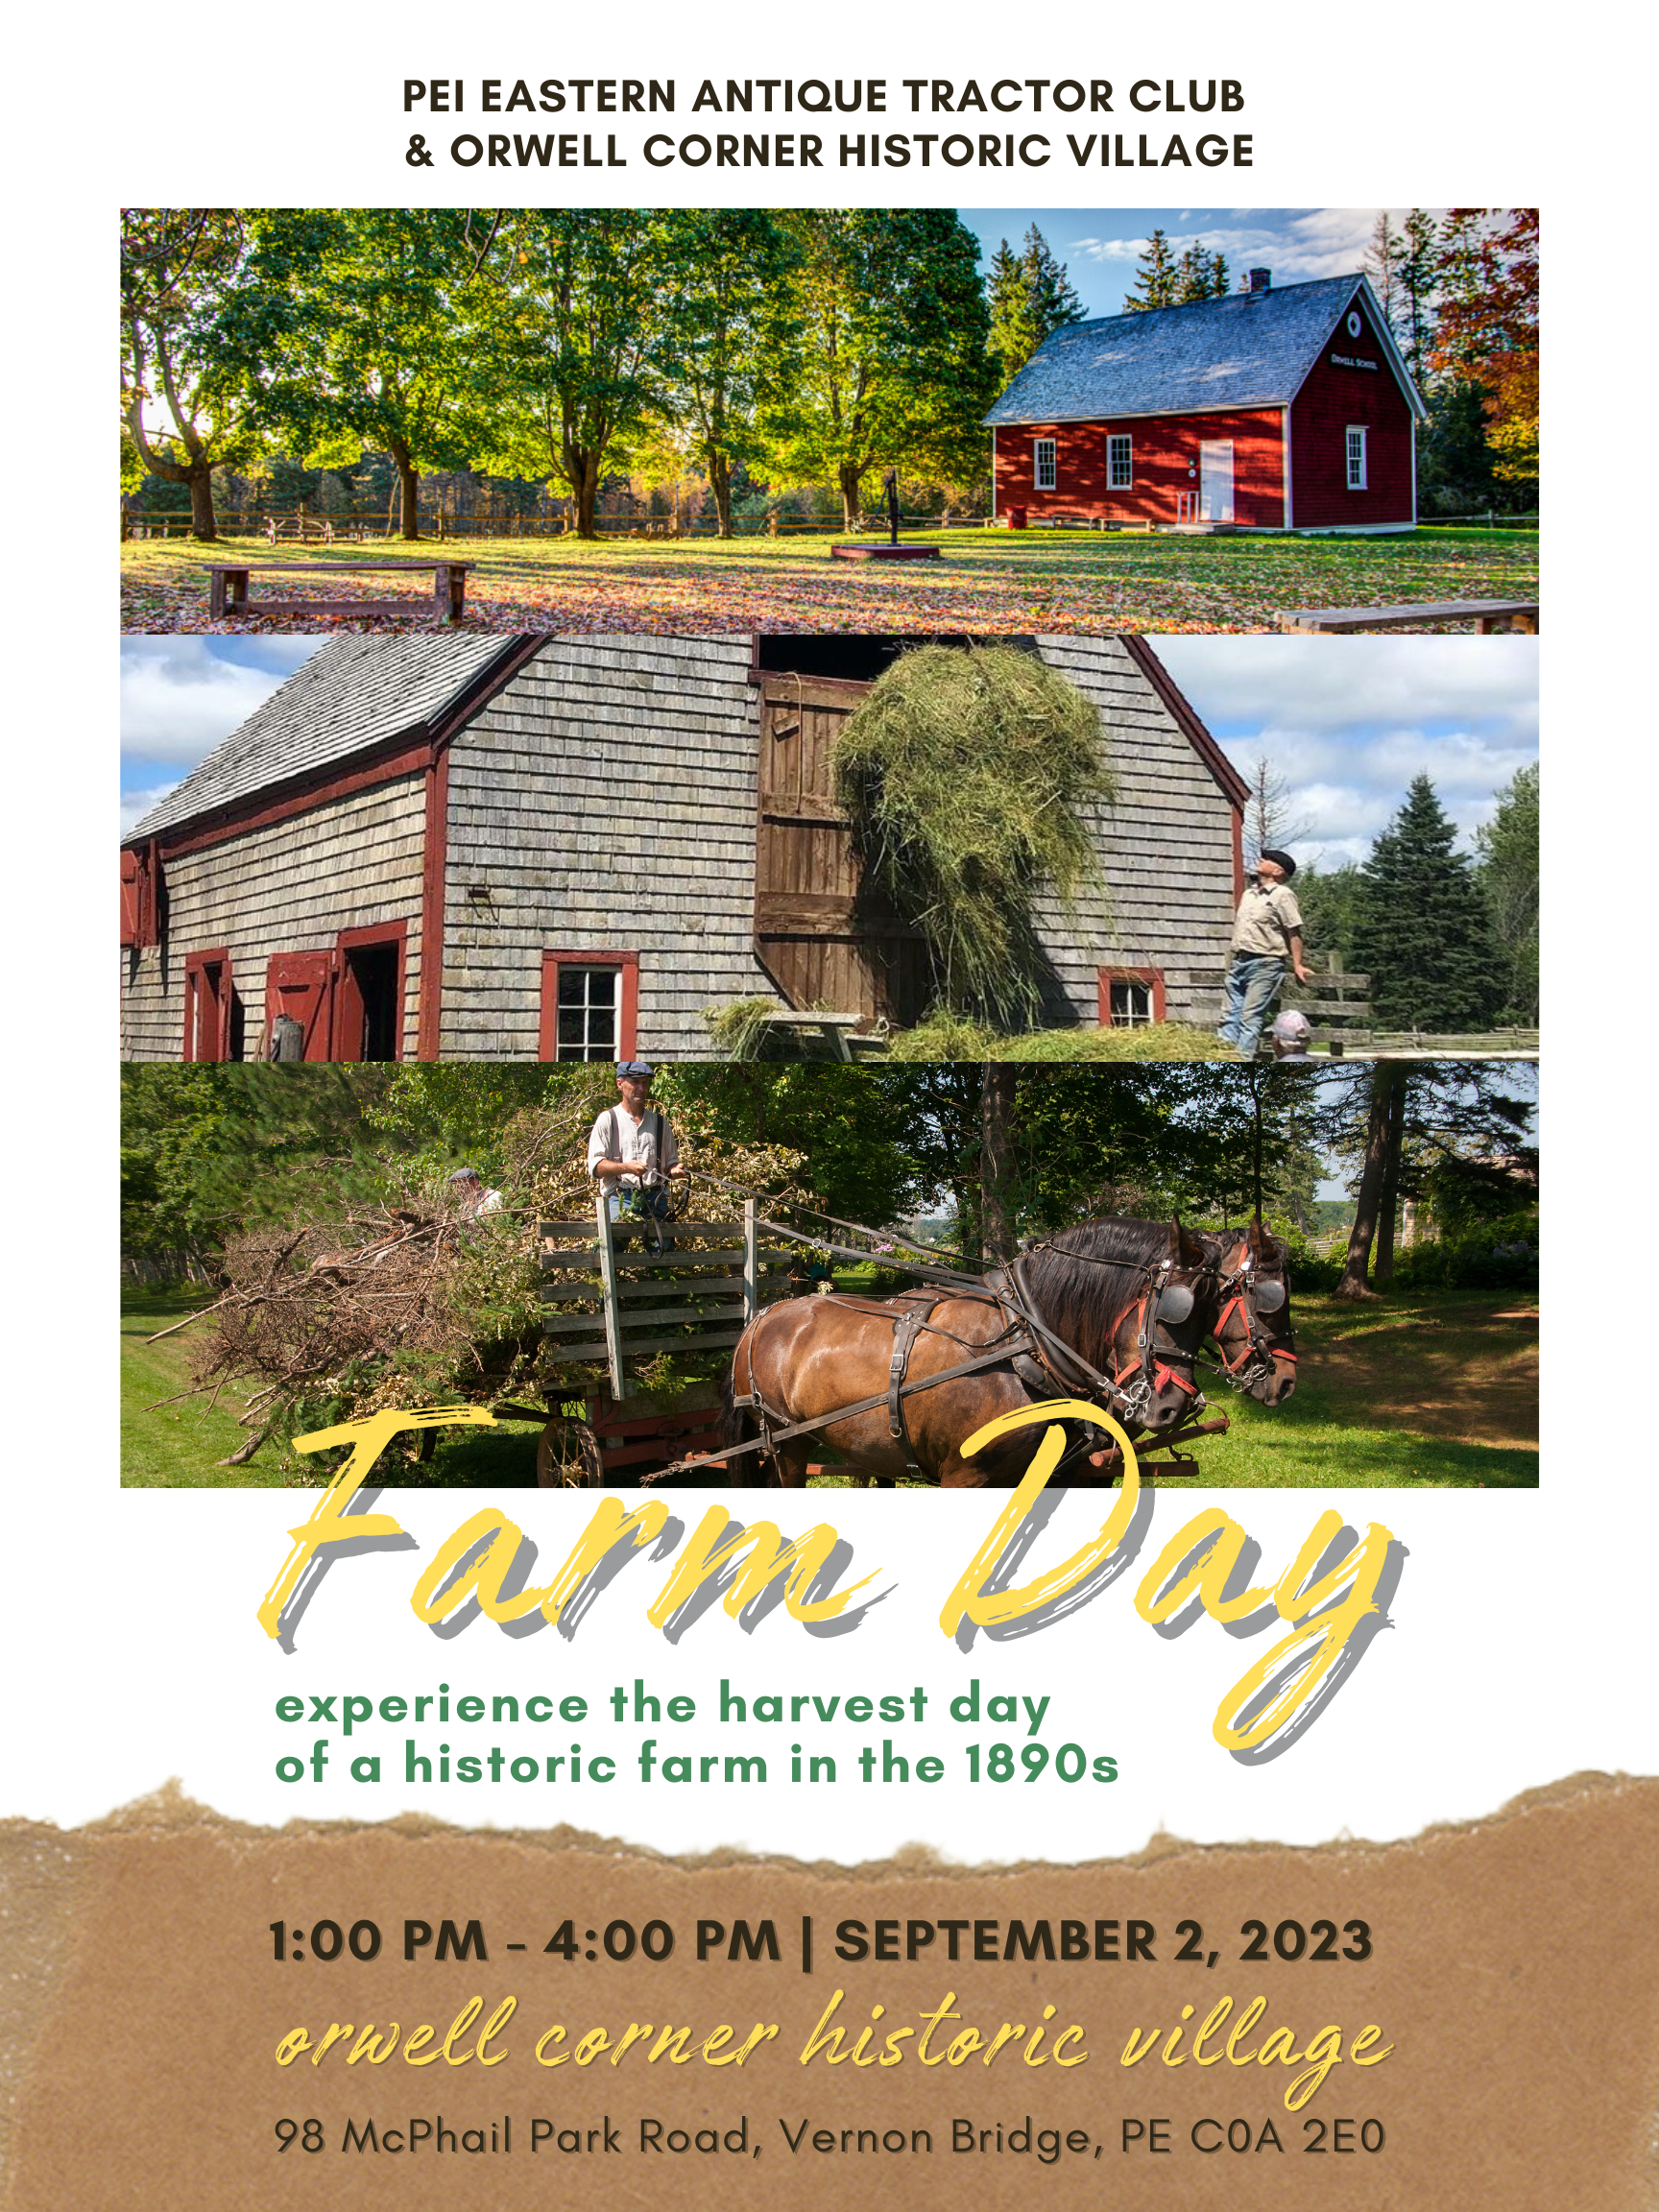 Poster of Orwell Corner Farm Day on September 2, 2023. There are photos of Orwell, horses, and storing hay on the loft.